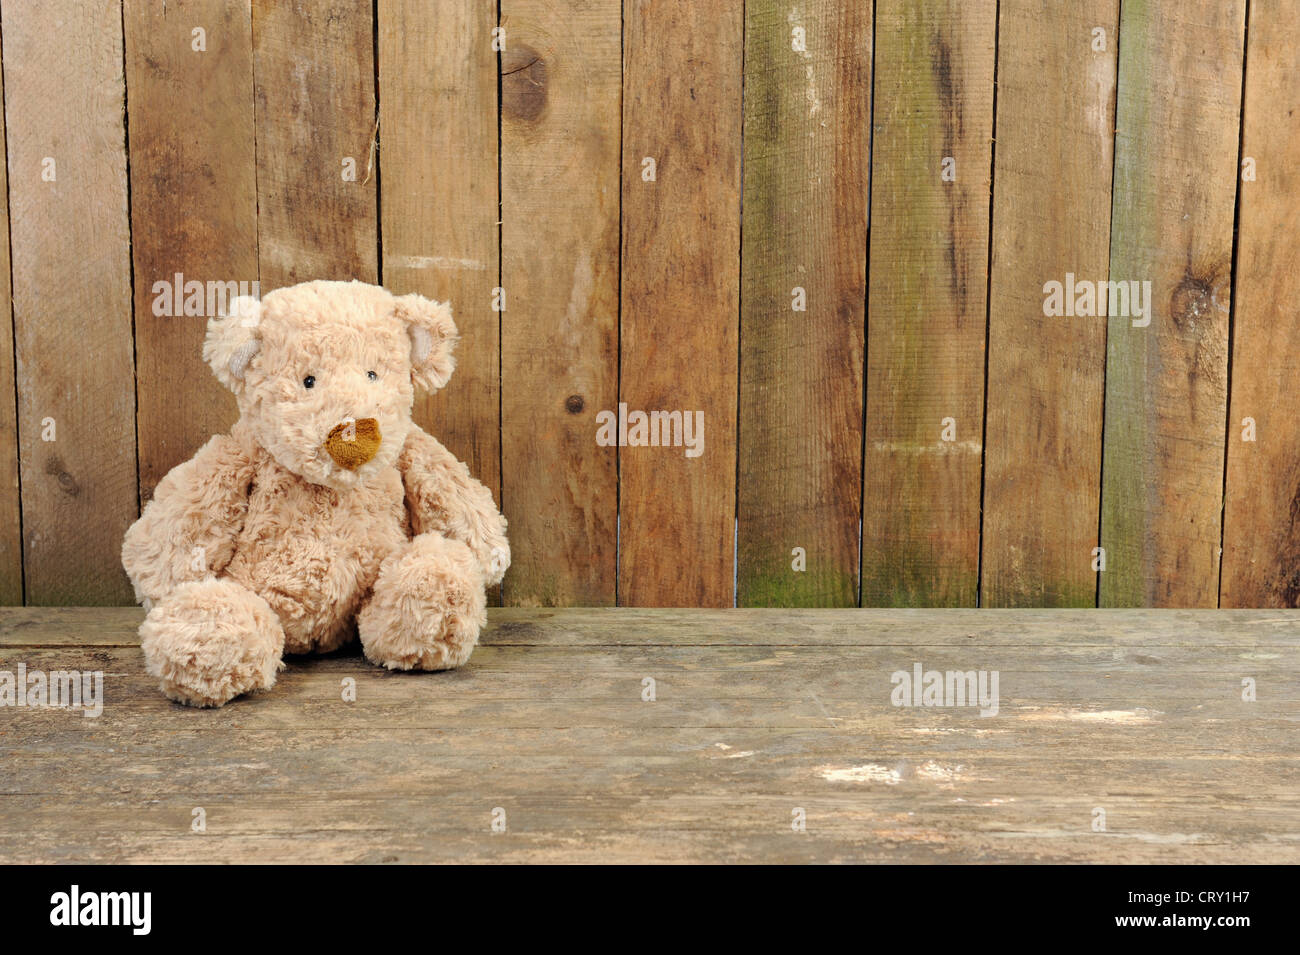 teddy bear seated against a old wooden wall Stock Photo